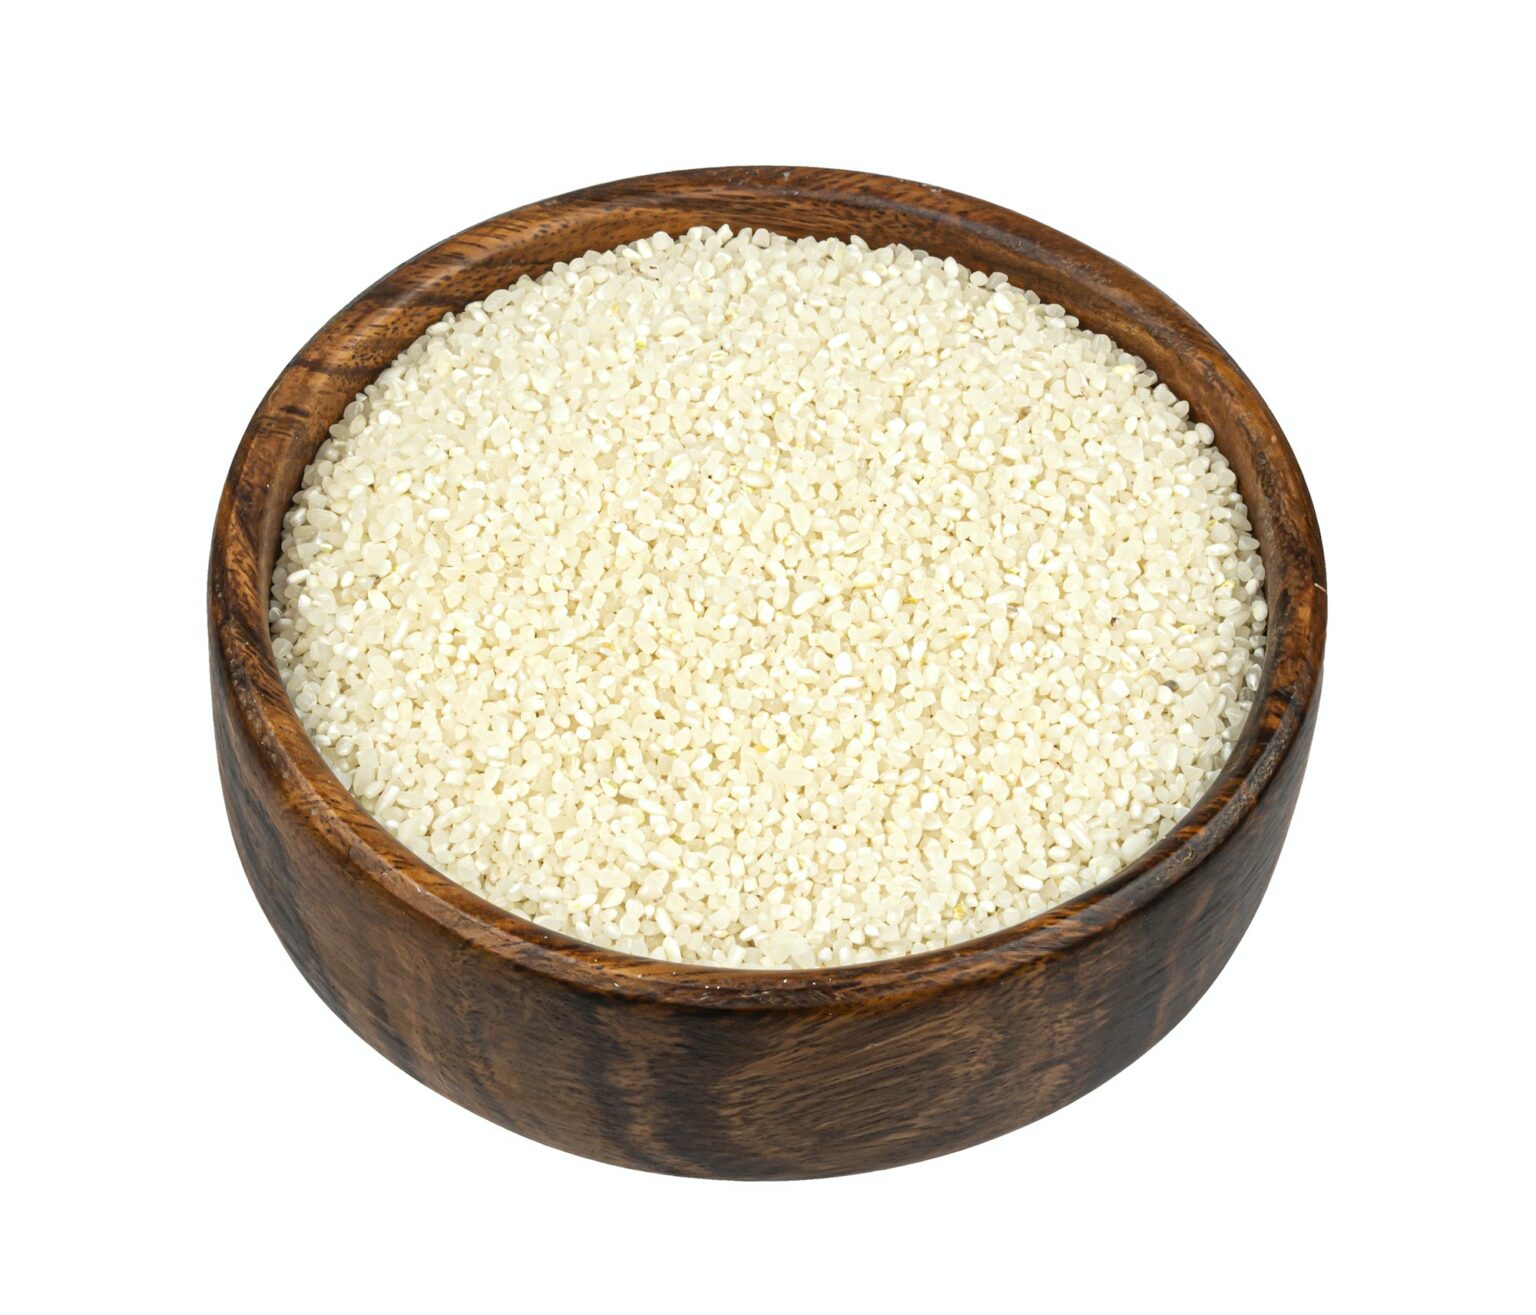 Small crushed rice isolated on white background